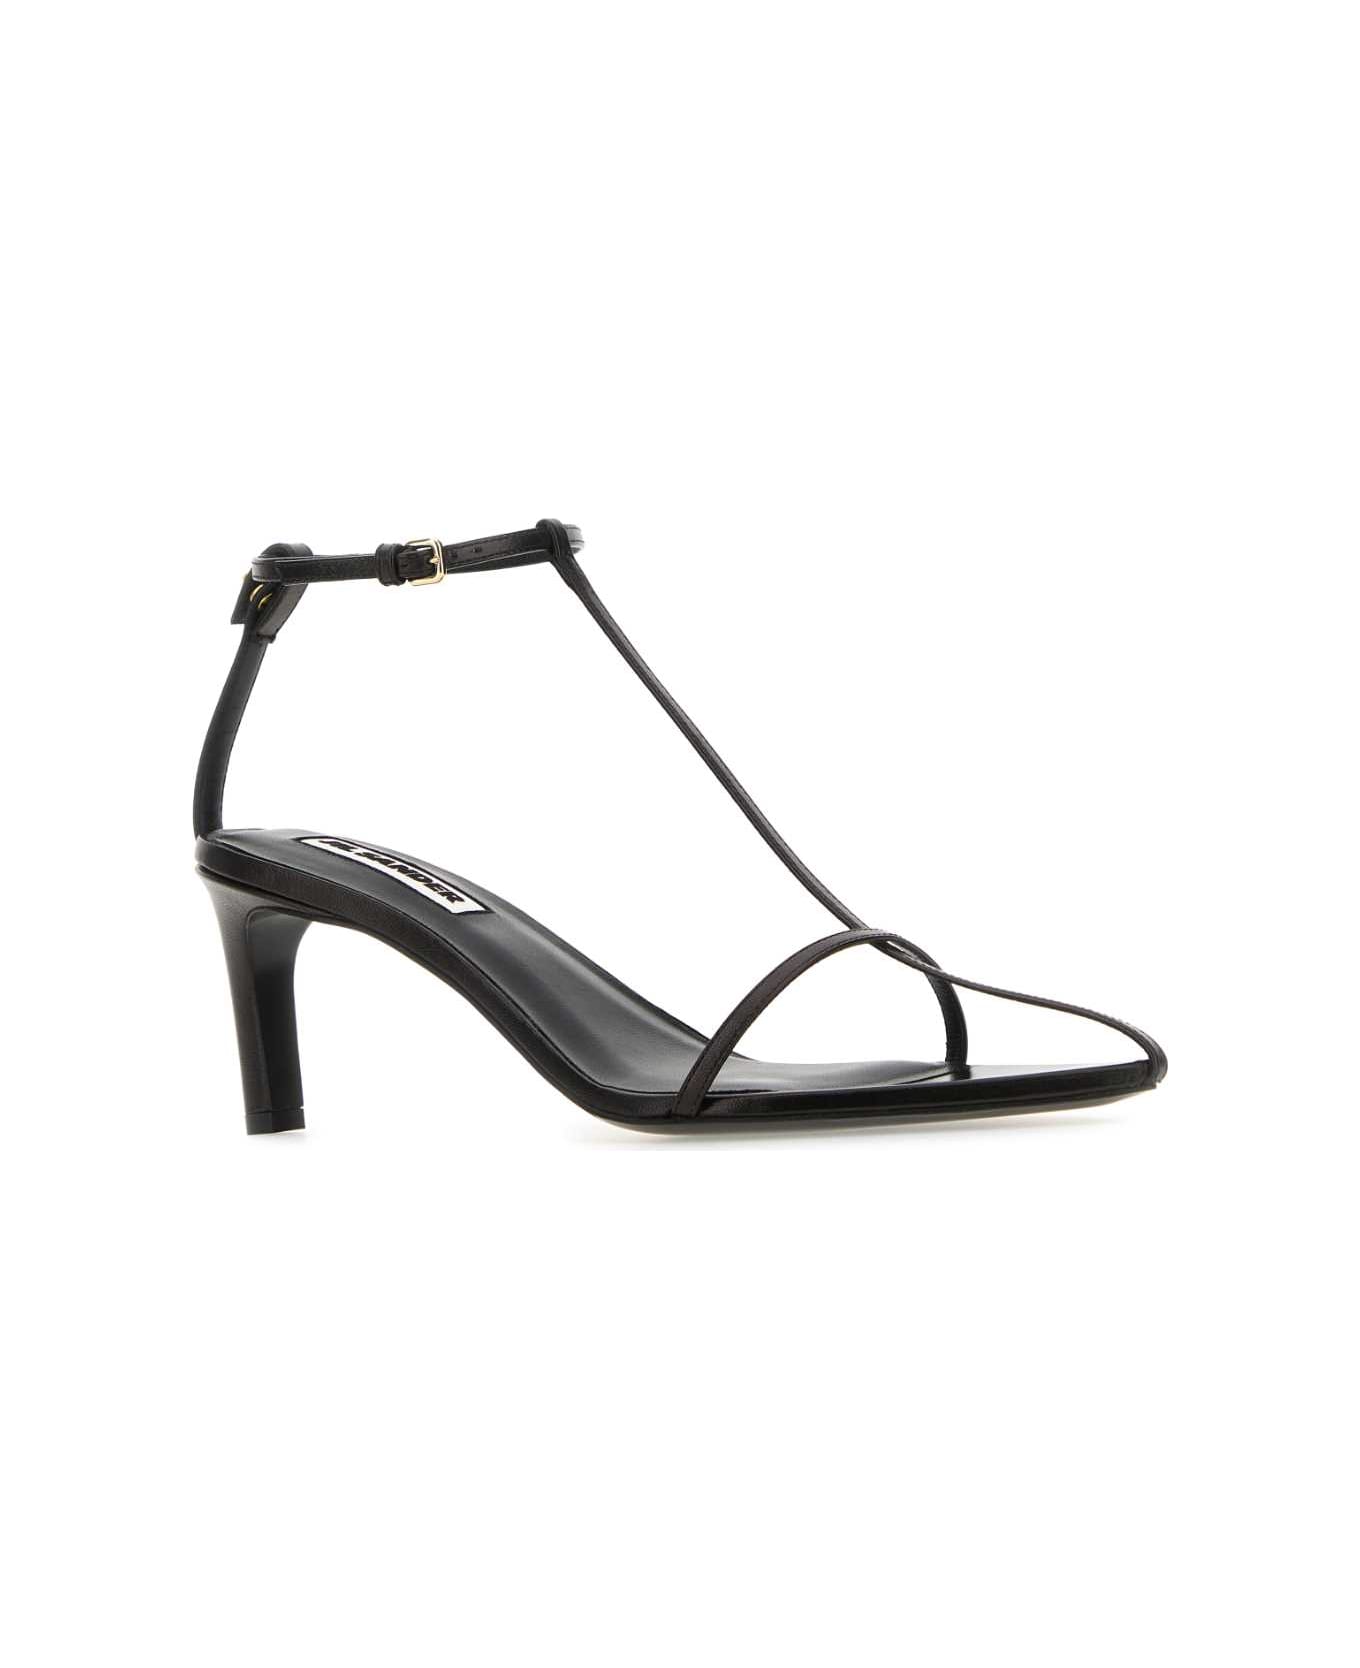 Jil Sander Black Leather Pointed Sandals With Straps - BLACK サンダル